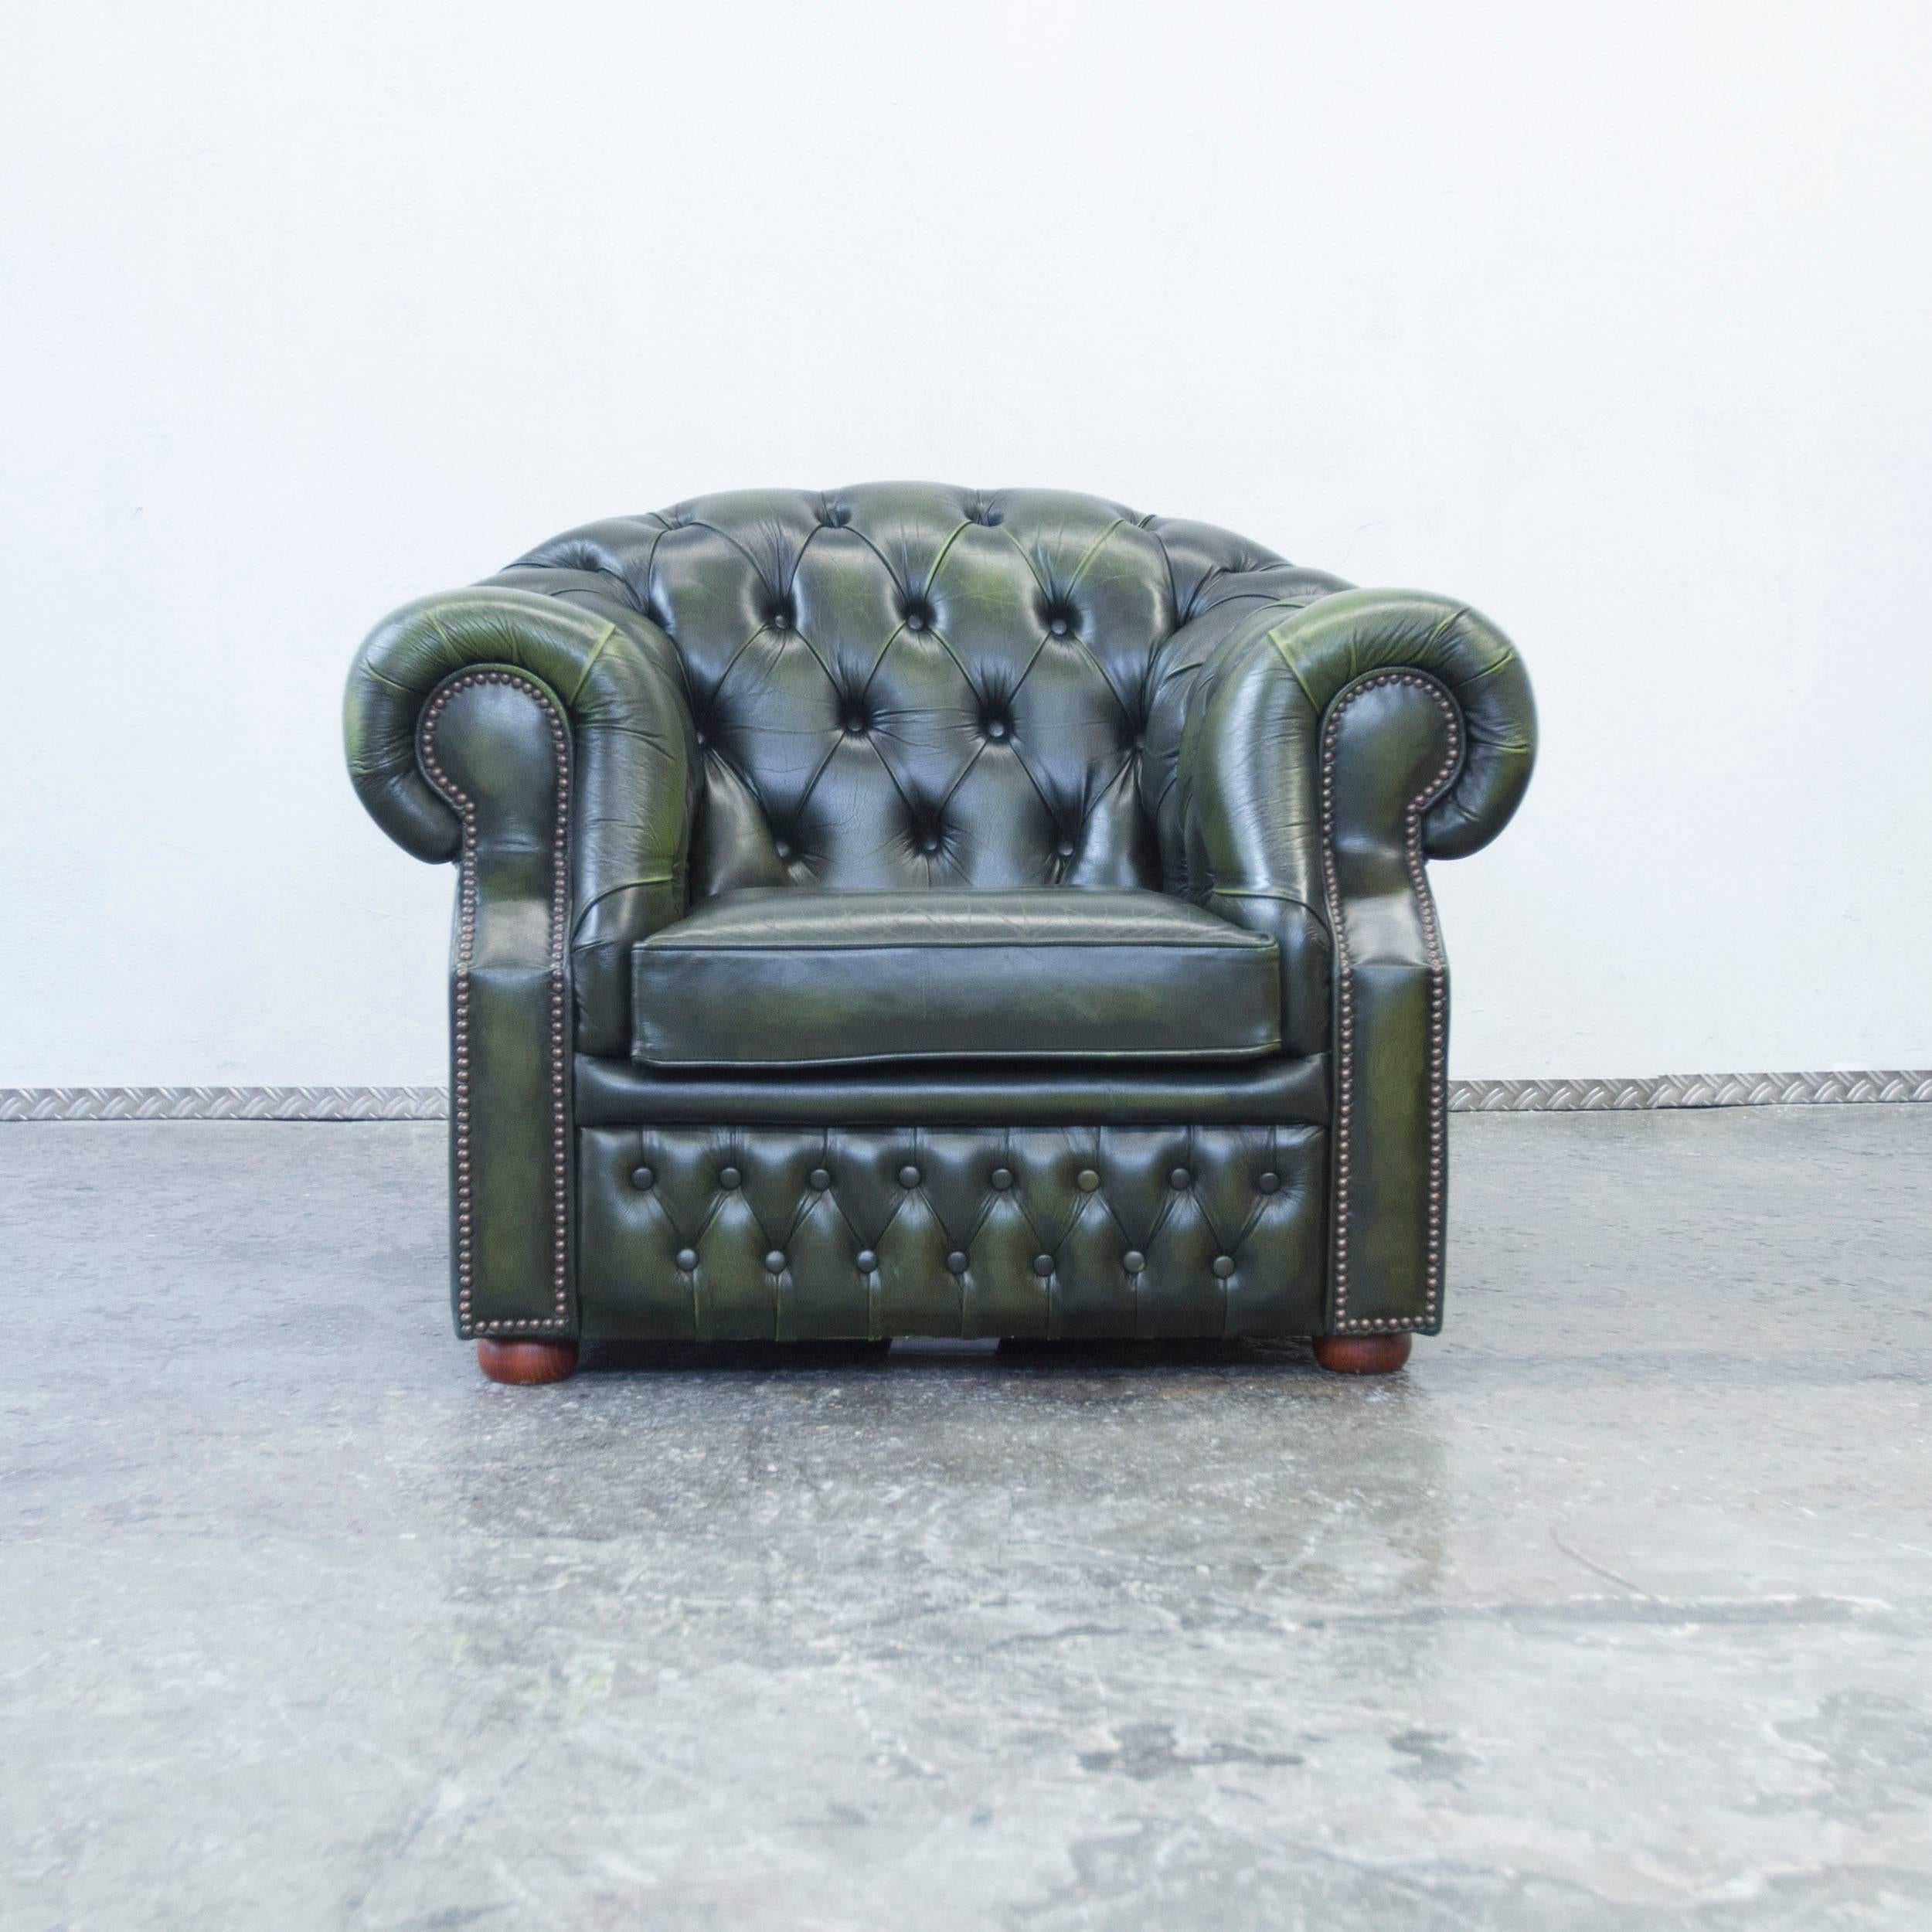 Green colored original Centurion Chesterfield leather armchair in a vintage design, made for pure comfort and elegance.